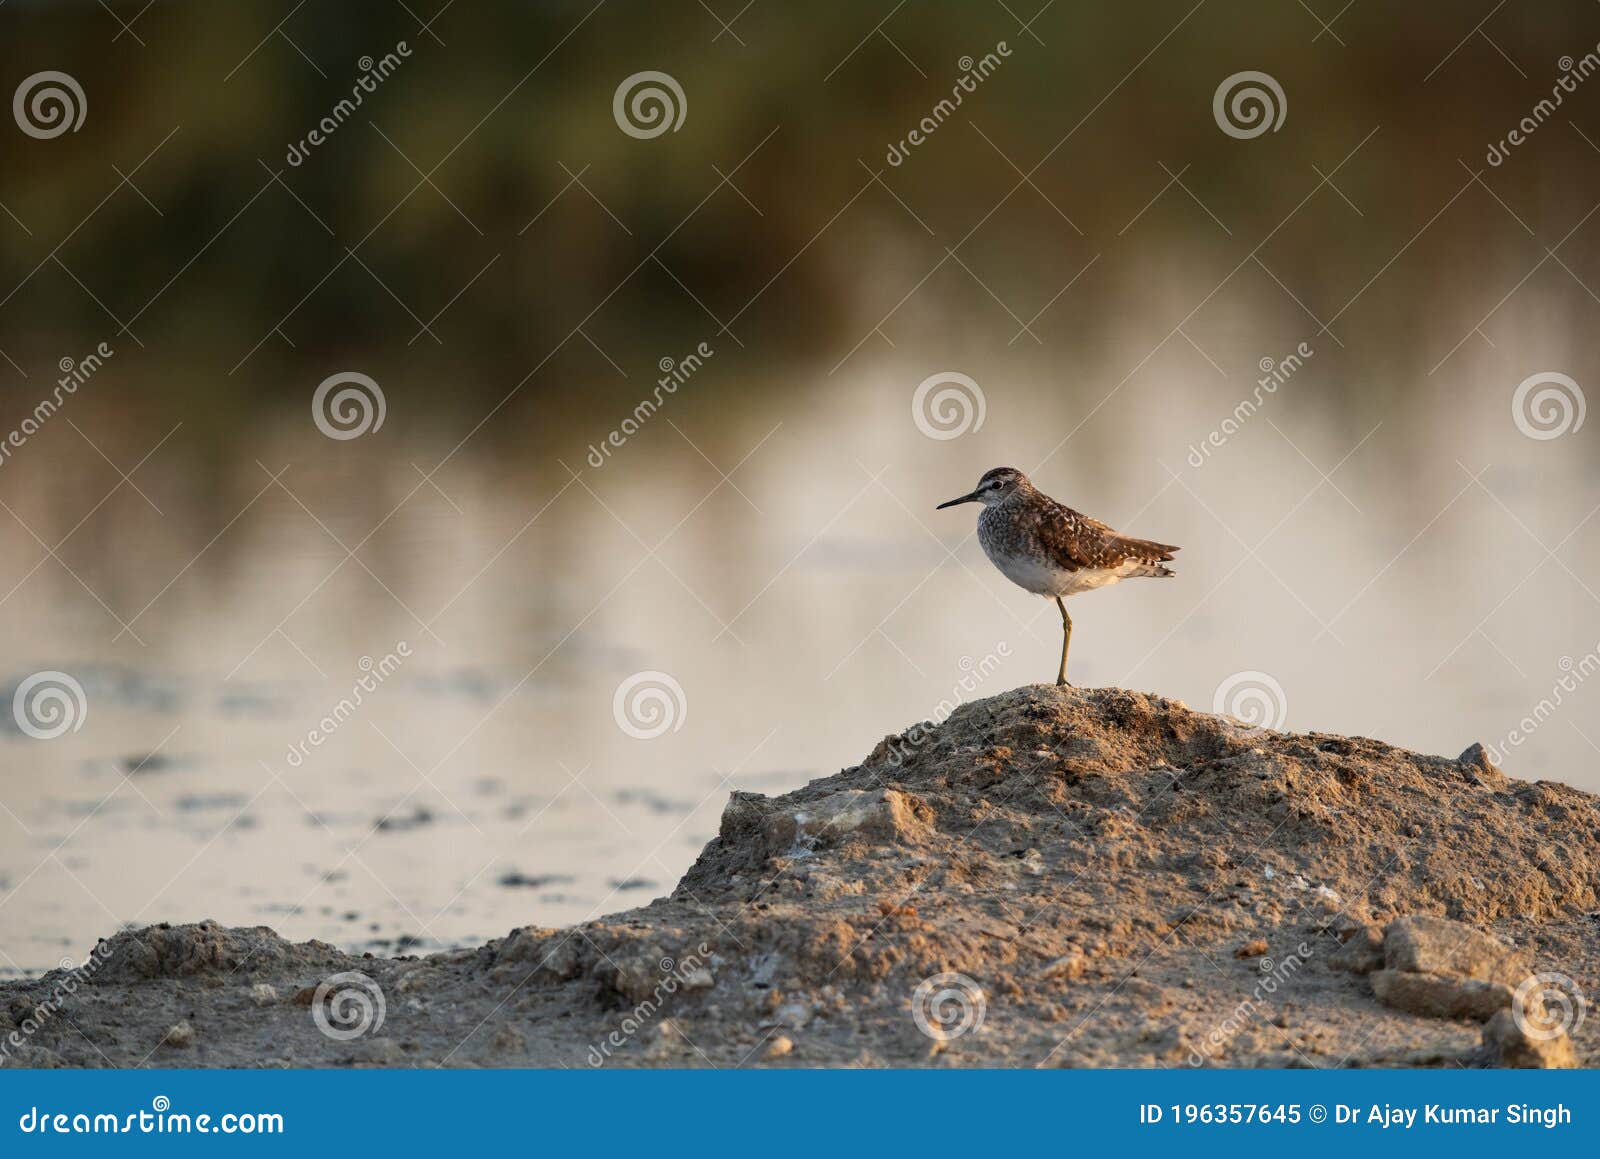 a wood sandpiper on a mound at asker marsh, bahrain